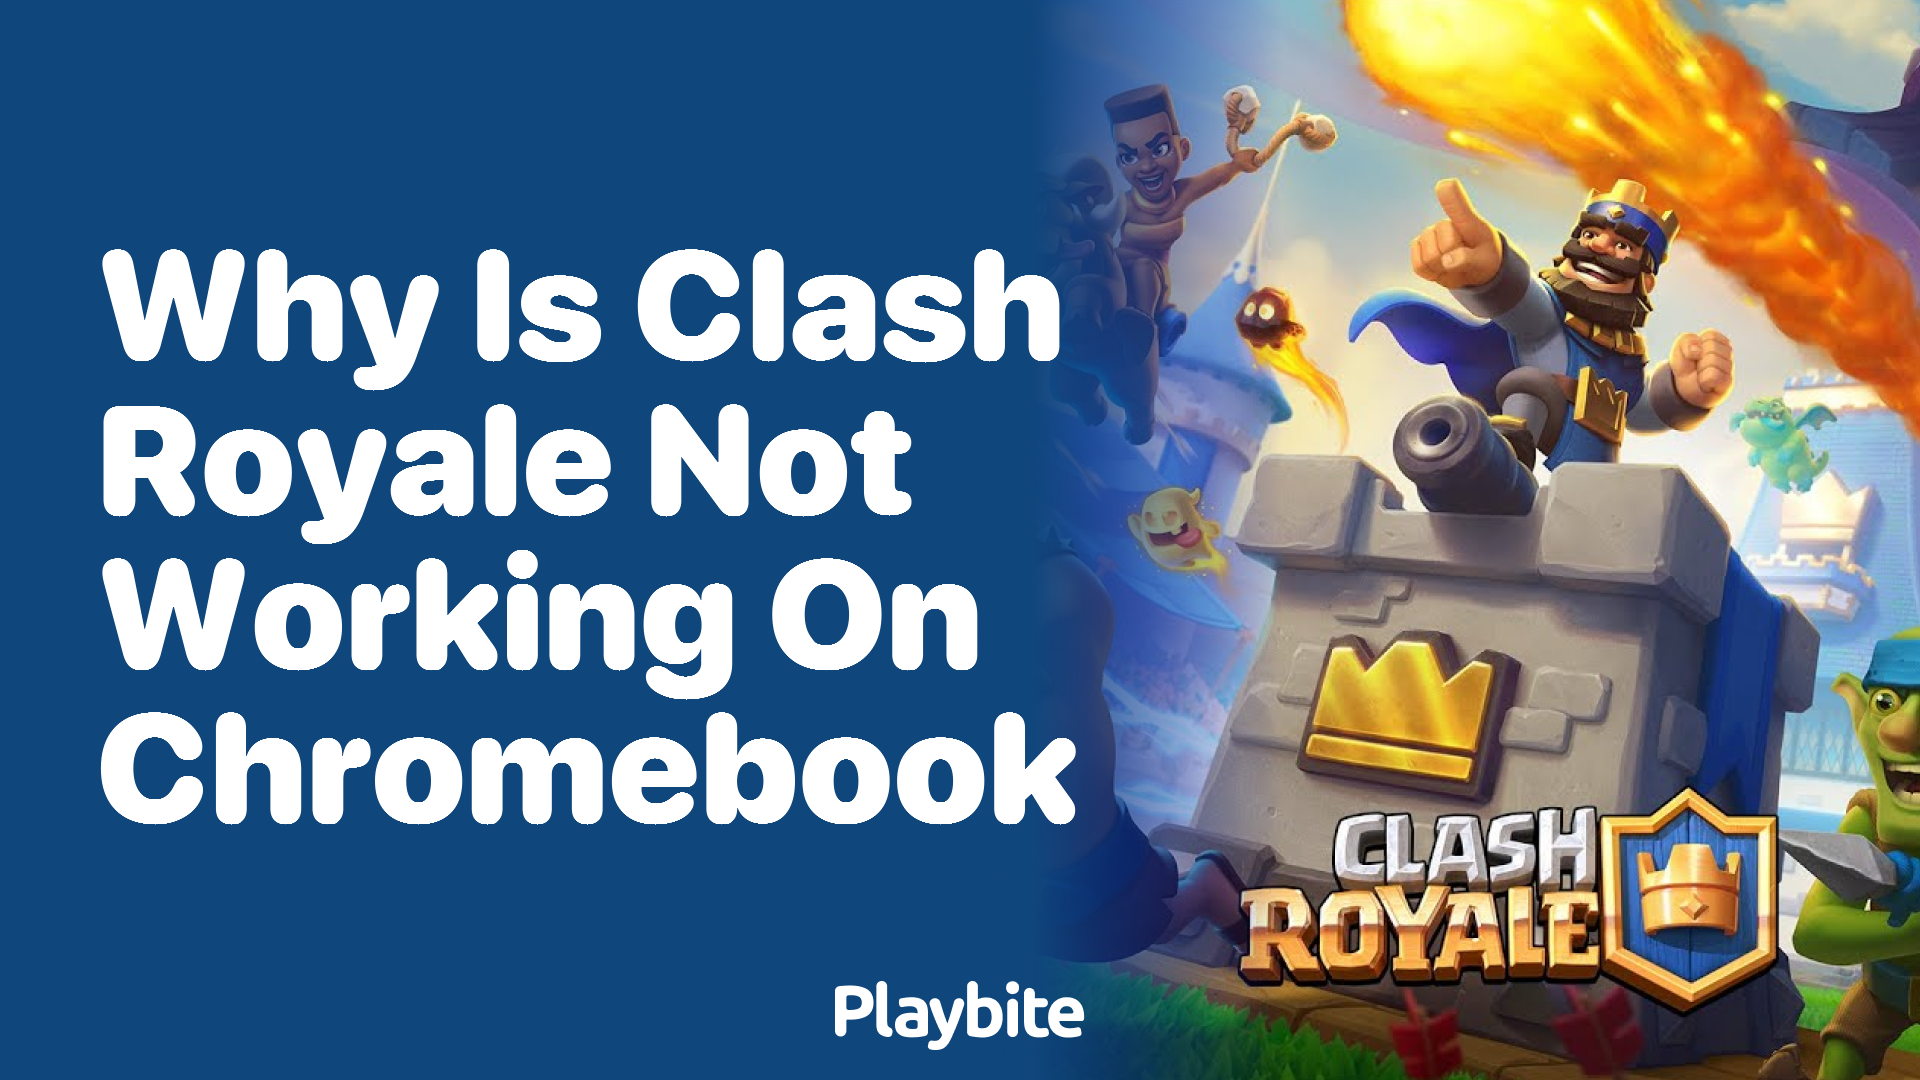 Why Is Clash Royale Not Working on Chromebook?